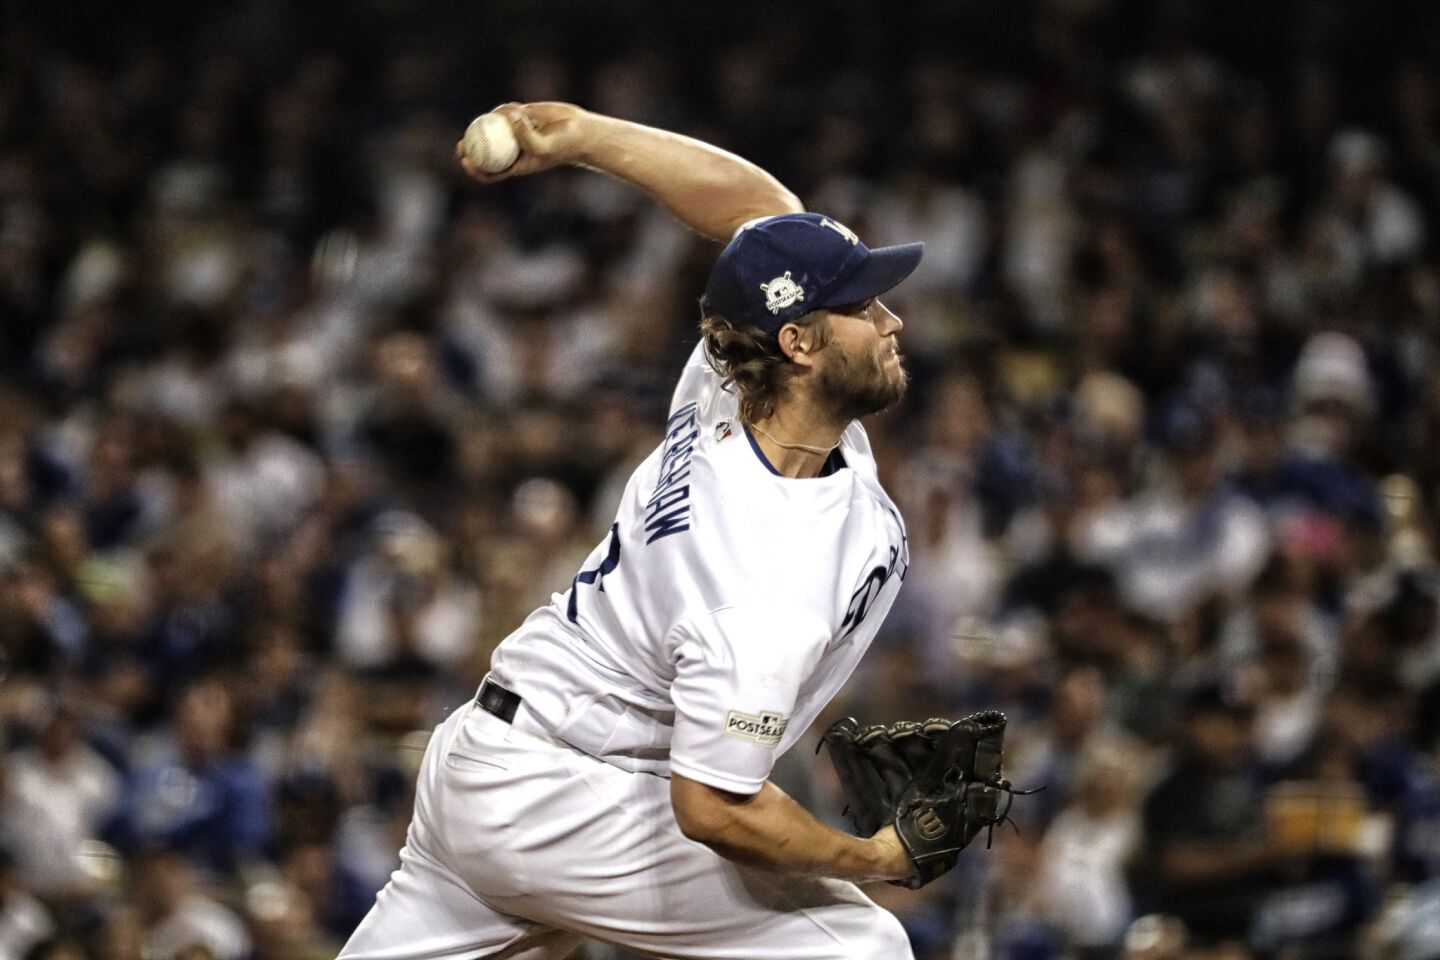 Clayton Kershaw pitches in the fifth inning against the Diamondbacks during Game 1 of the National League division series at Dodger Stadium.